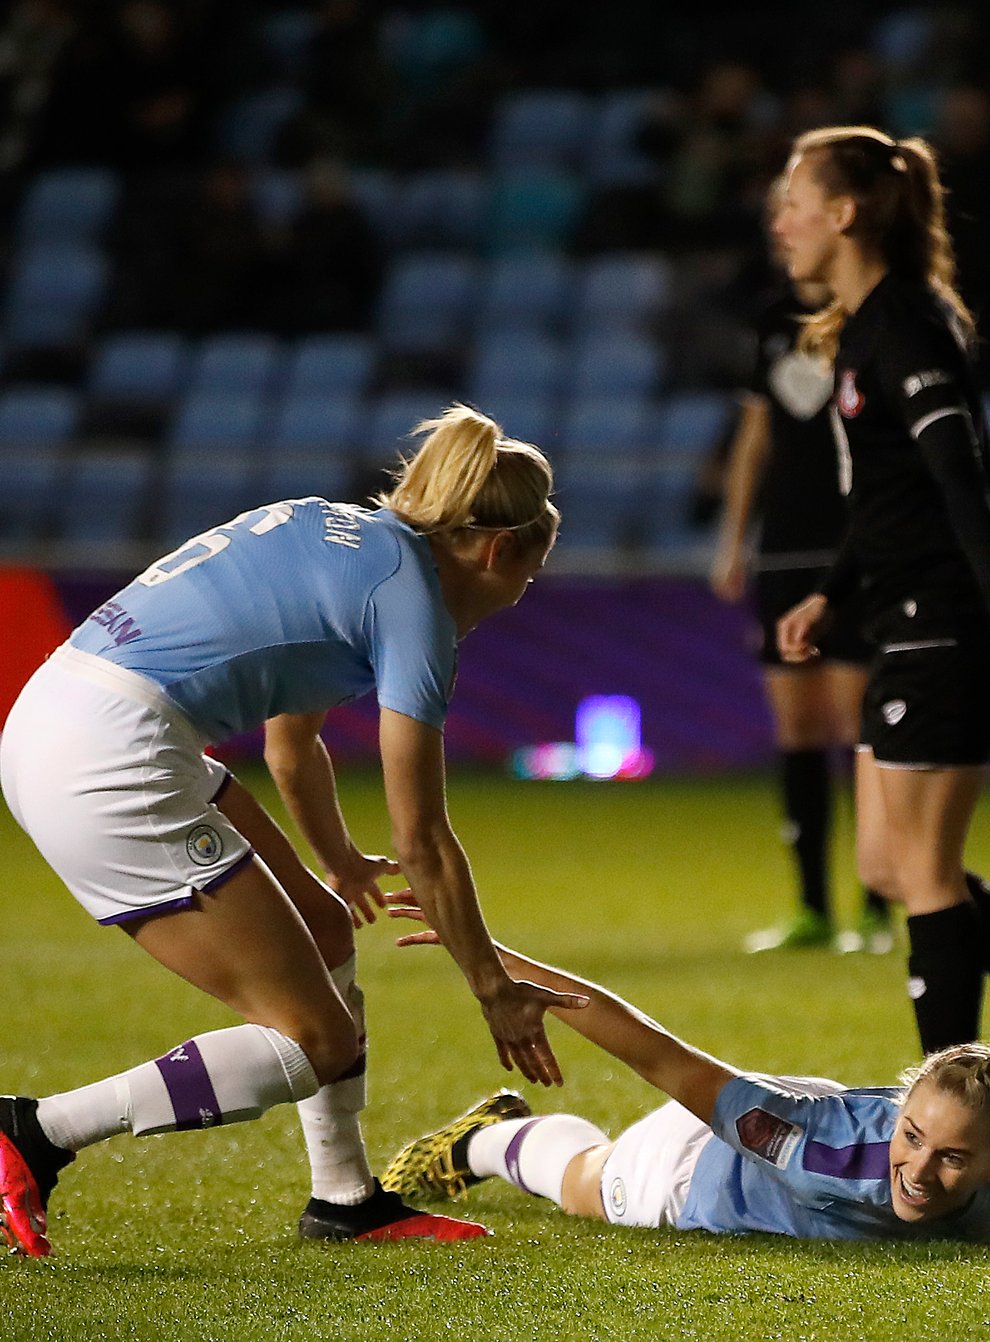 Manchester City defender Bonner scored to keep her side top of the Women's Super League (PA Images)